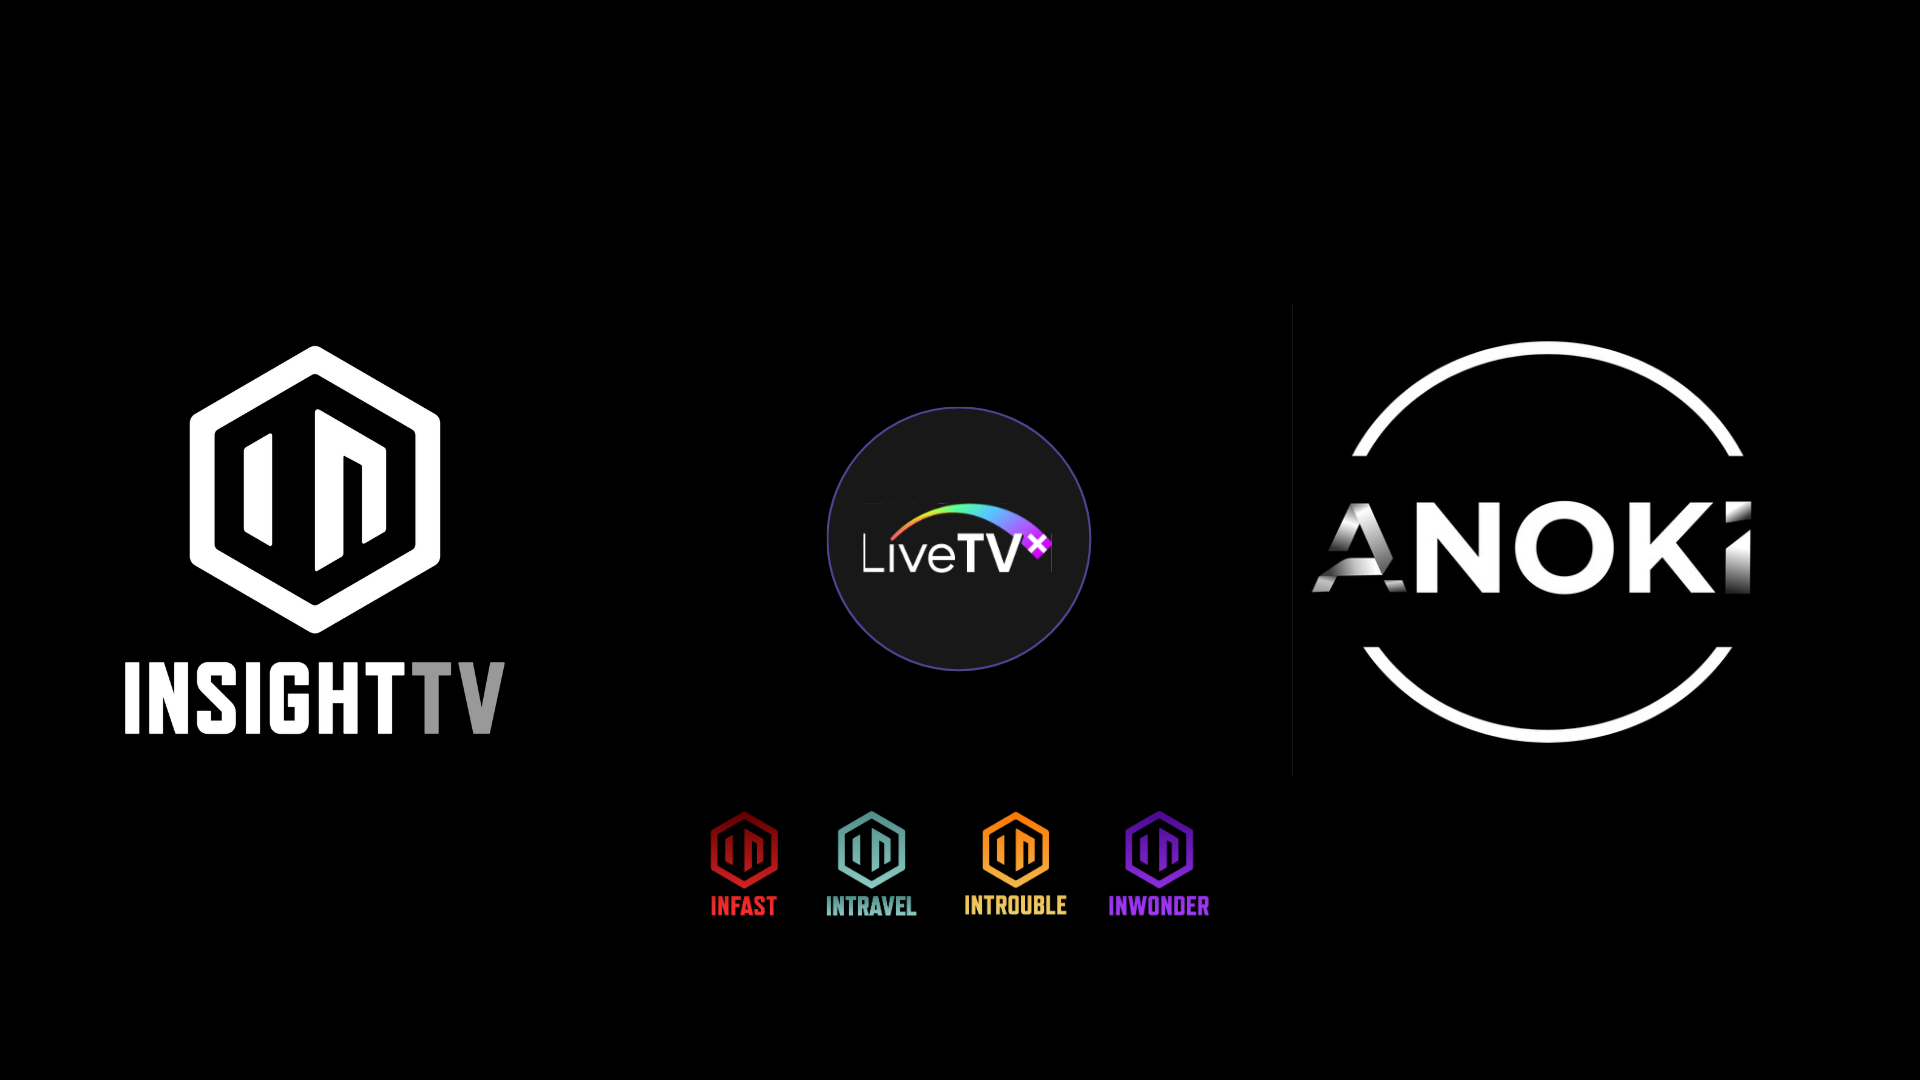 INFAST, INTRAVEL, INTROUBLE and INWONDER launch in US on LiveTVx by Anoki